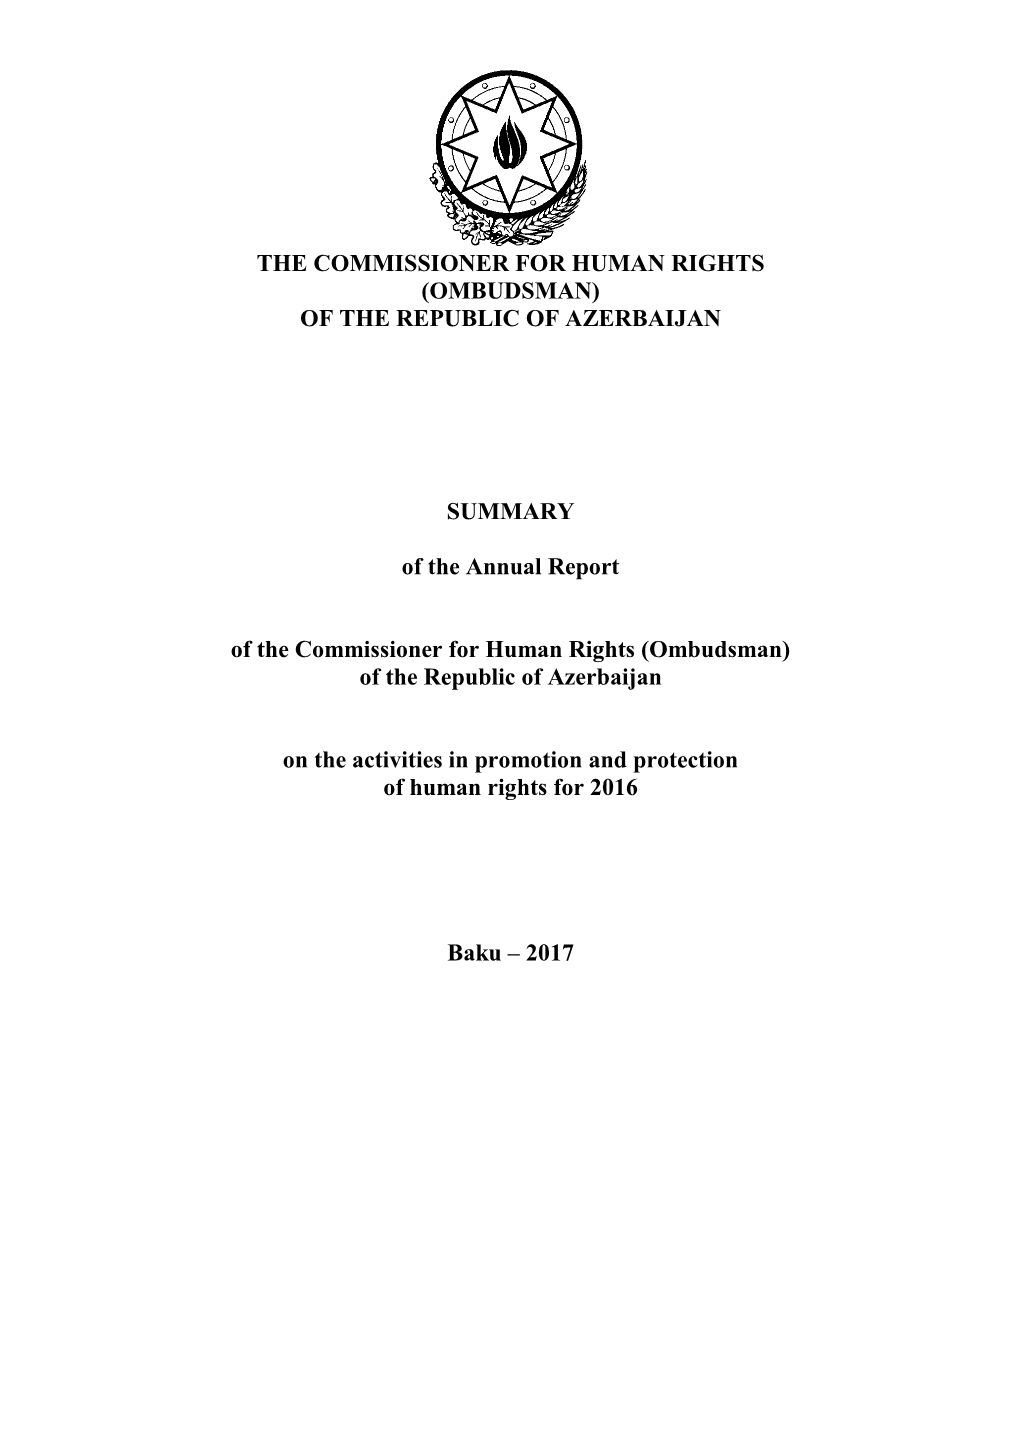 THE COMMISSIONER for HUMAN RIGHTS (OMBUDSMAN) of the REPUBLIC of AZERBAIJAN SUMMARY of the Annual Report of the Commissioner Fo